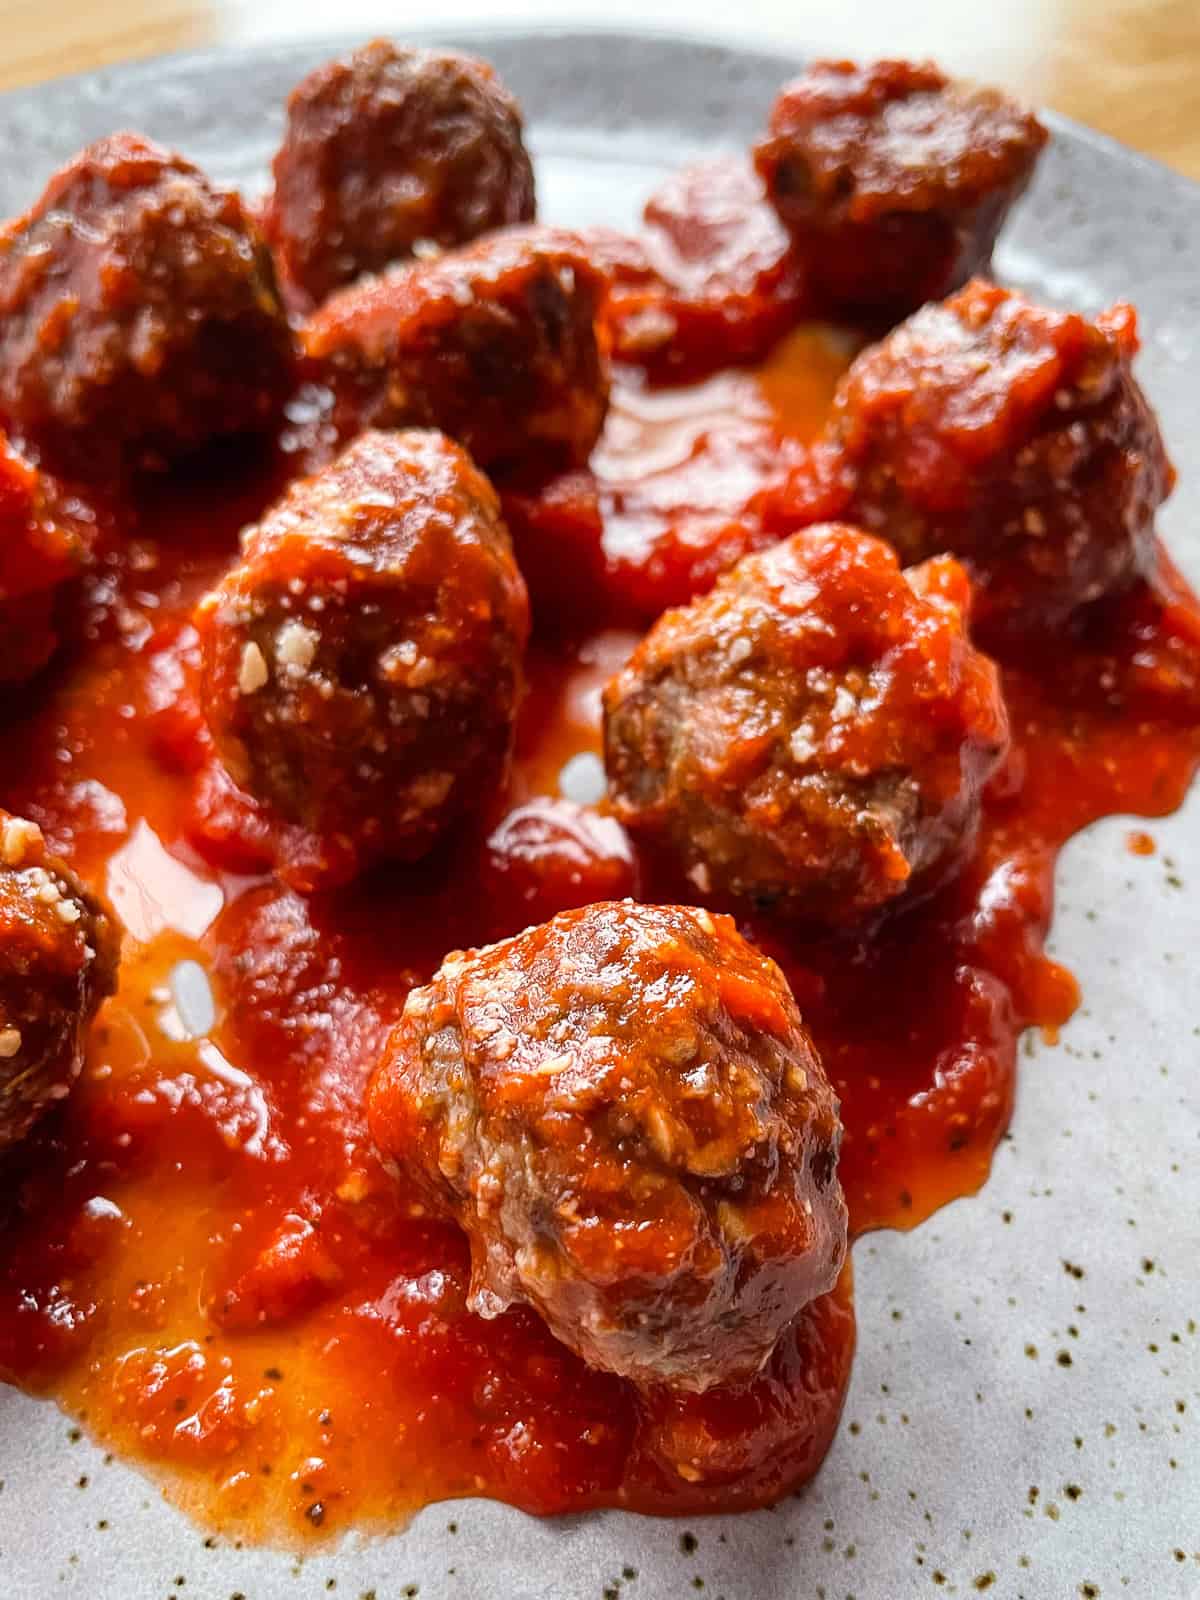 Baked meatballs on a plate covered with pasta sauce.